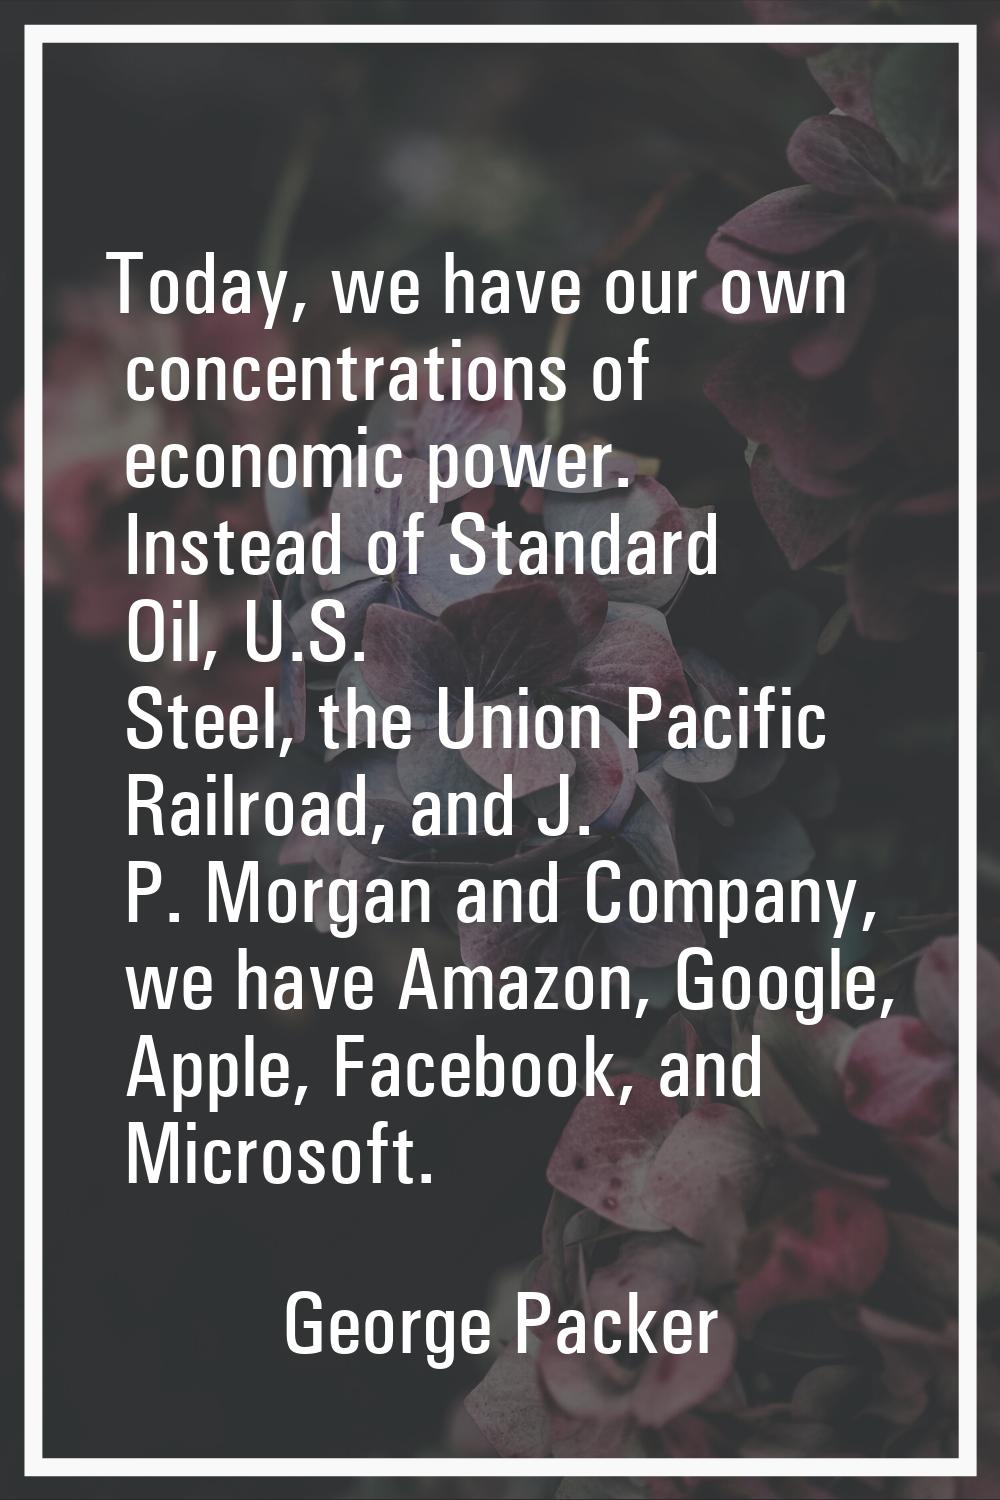 Today, we have our own concentrations of economic power. Instead of Standard Oil, U.S. Steel, the U